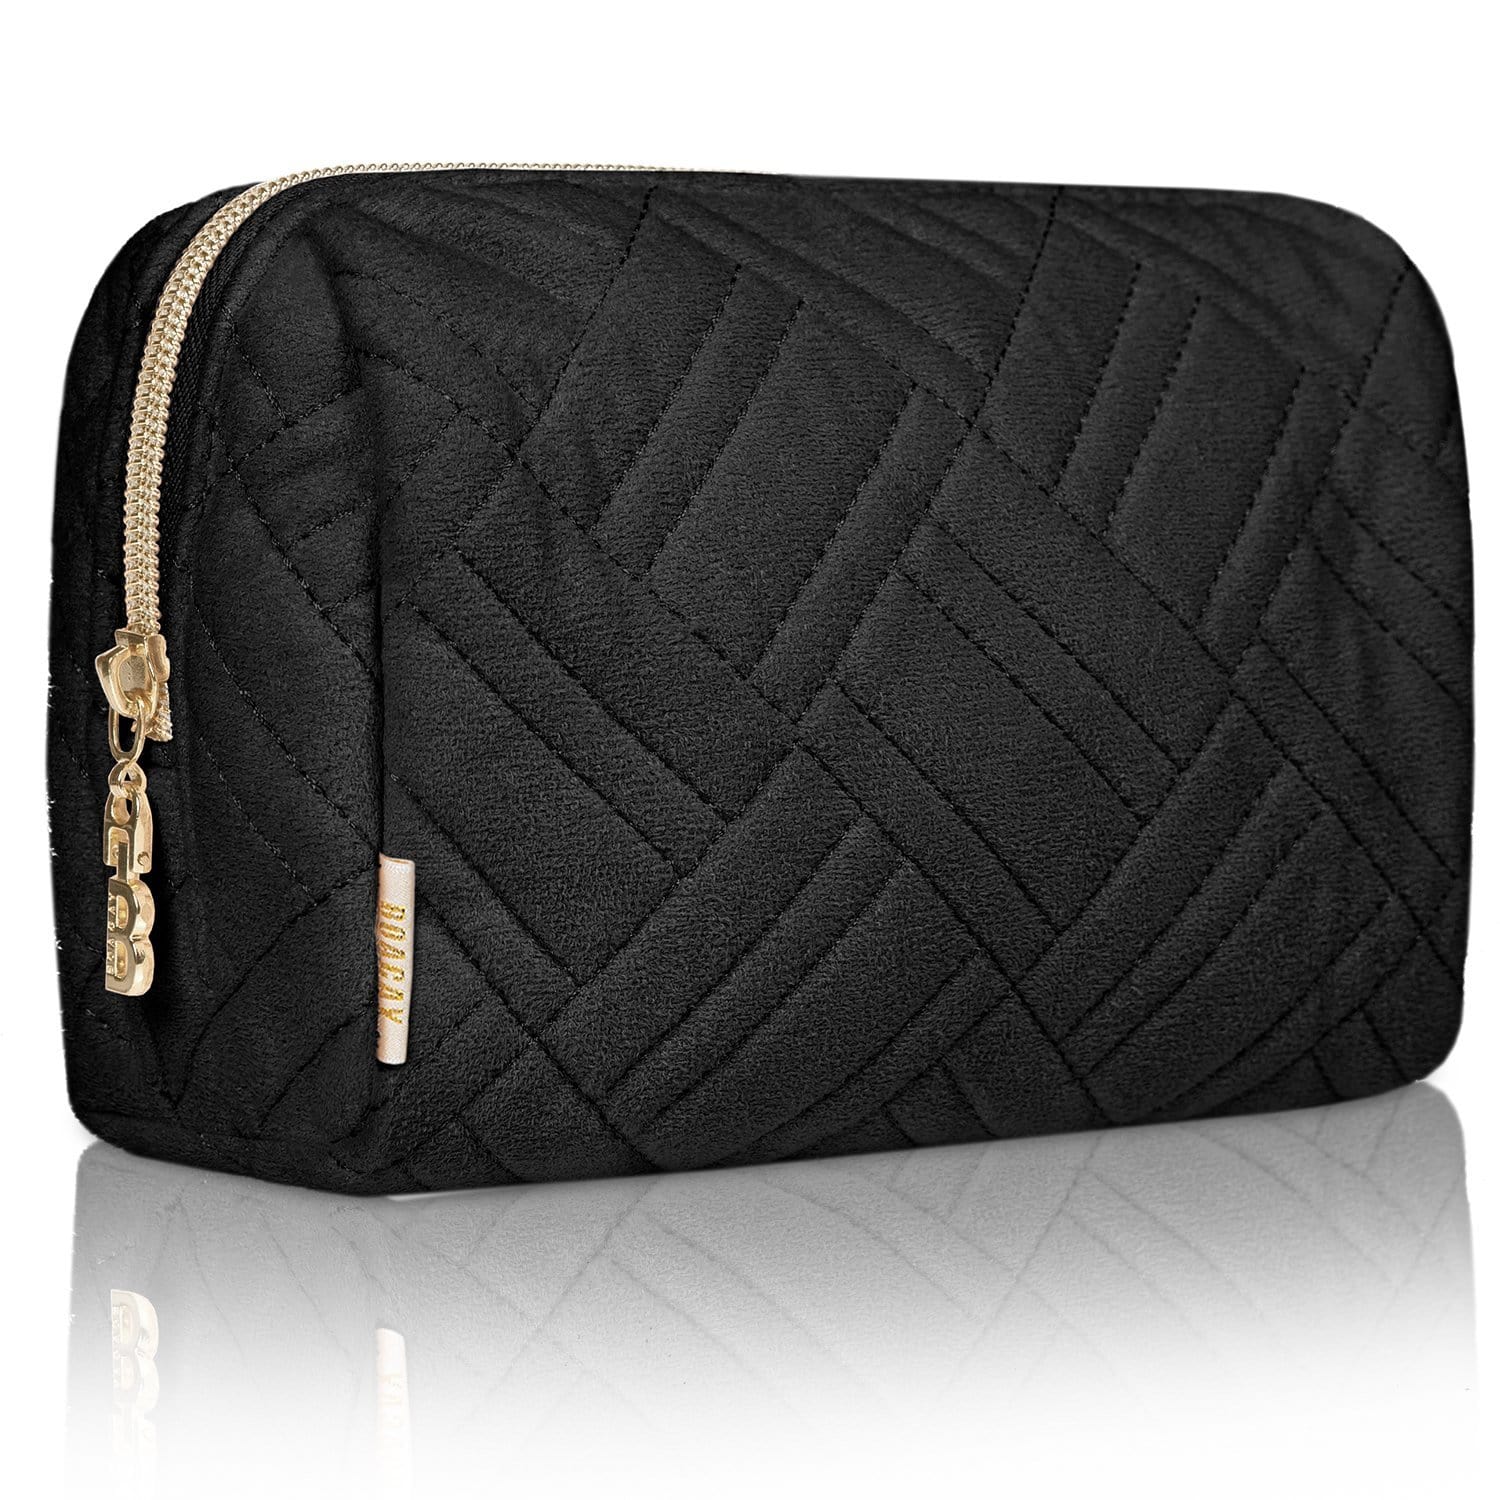 Black Travel Toiletry Bag with multiple compartments for a perfect organization of your cosmetics. It is waterproof and perfect for travel, camping or business trips. Practical and Portable, this cosmetic bag is ideal for home use, but you can also fit it in your purse when you are on the go.